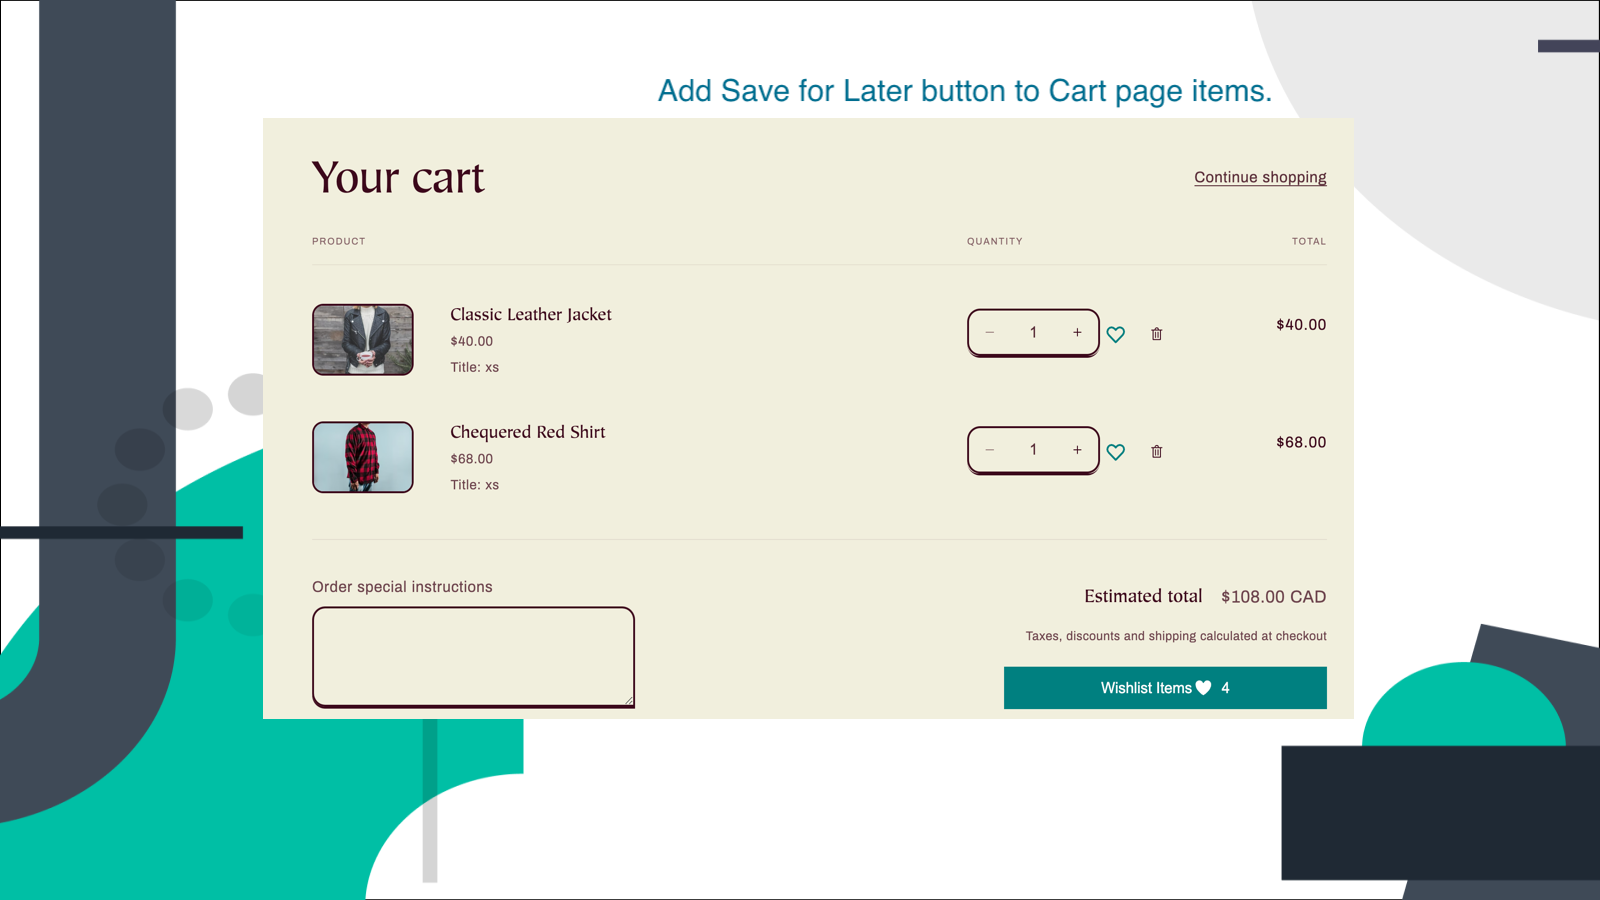 Add Save for Later button to Cart page items.